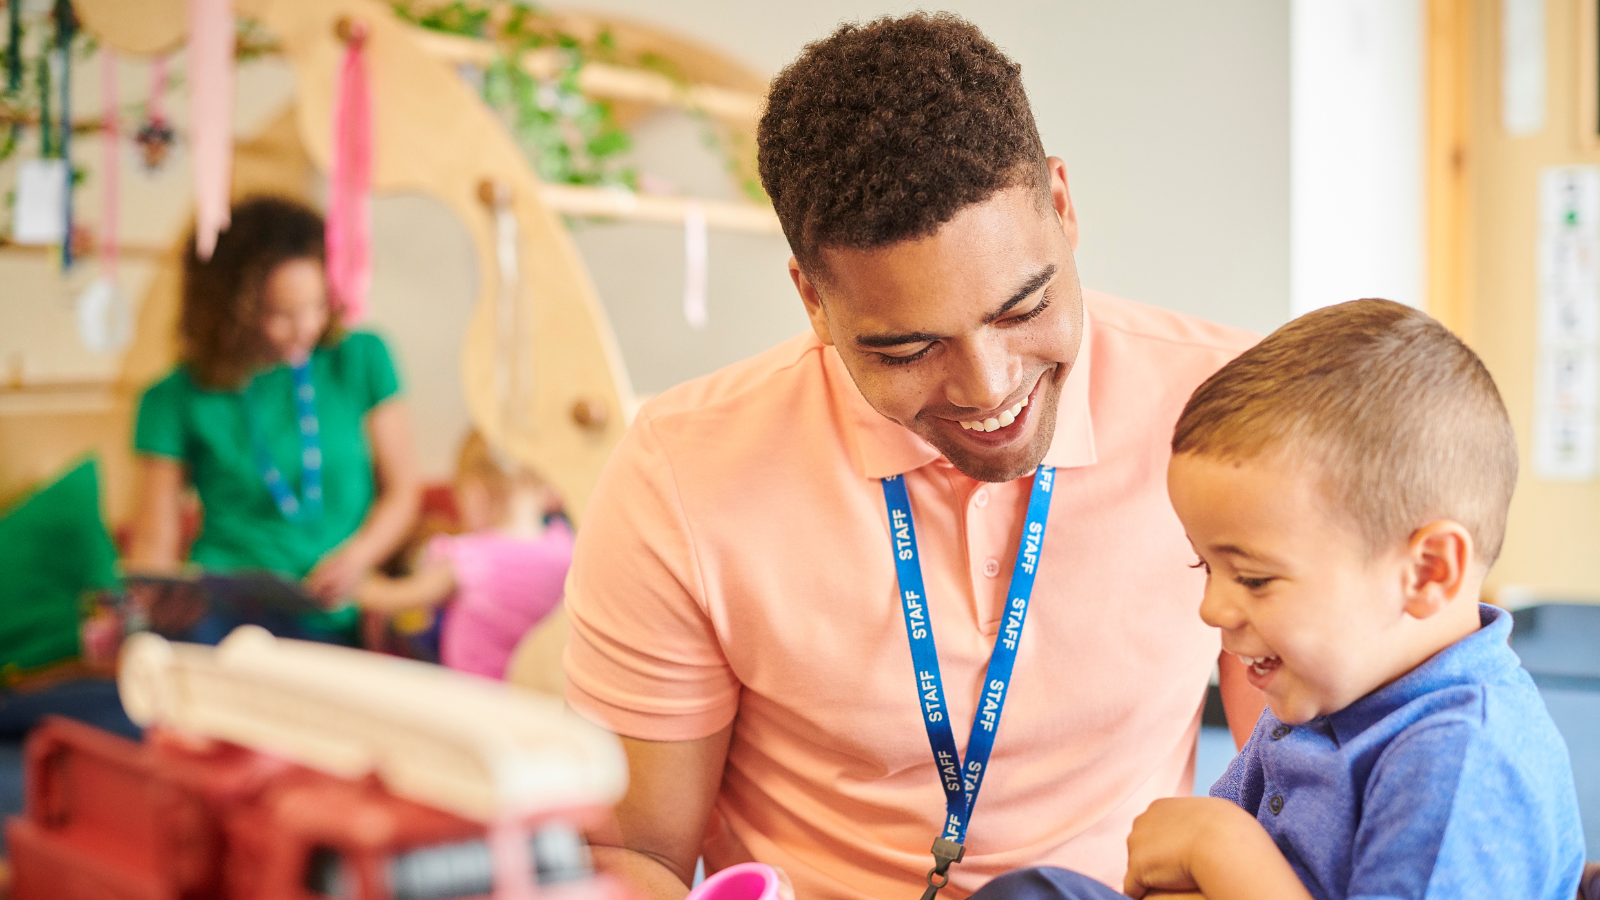 100 Ideas to Boost Employee Engagement at Your Childcare Center